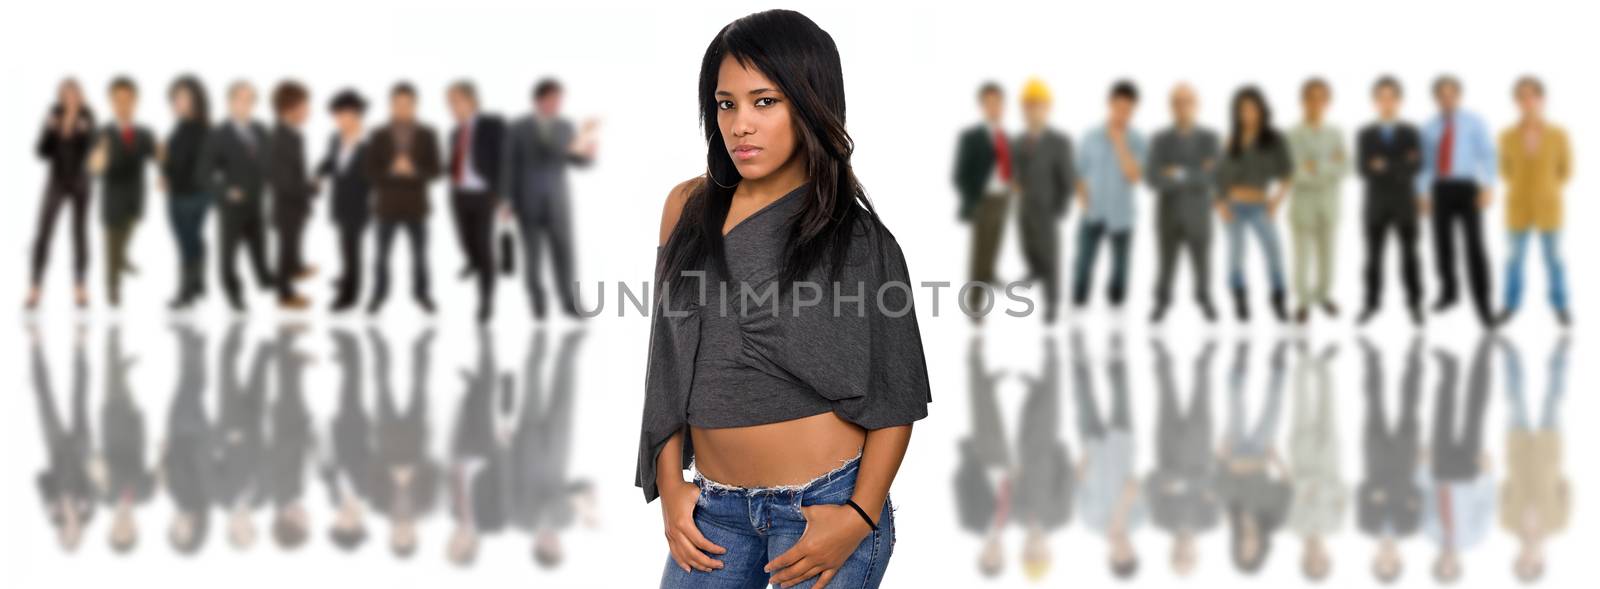 young casual woman portrait with some people in the back